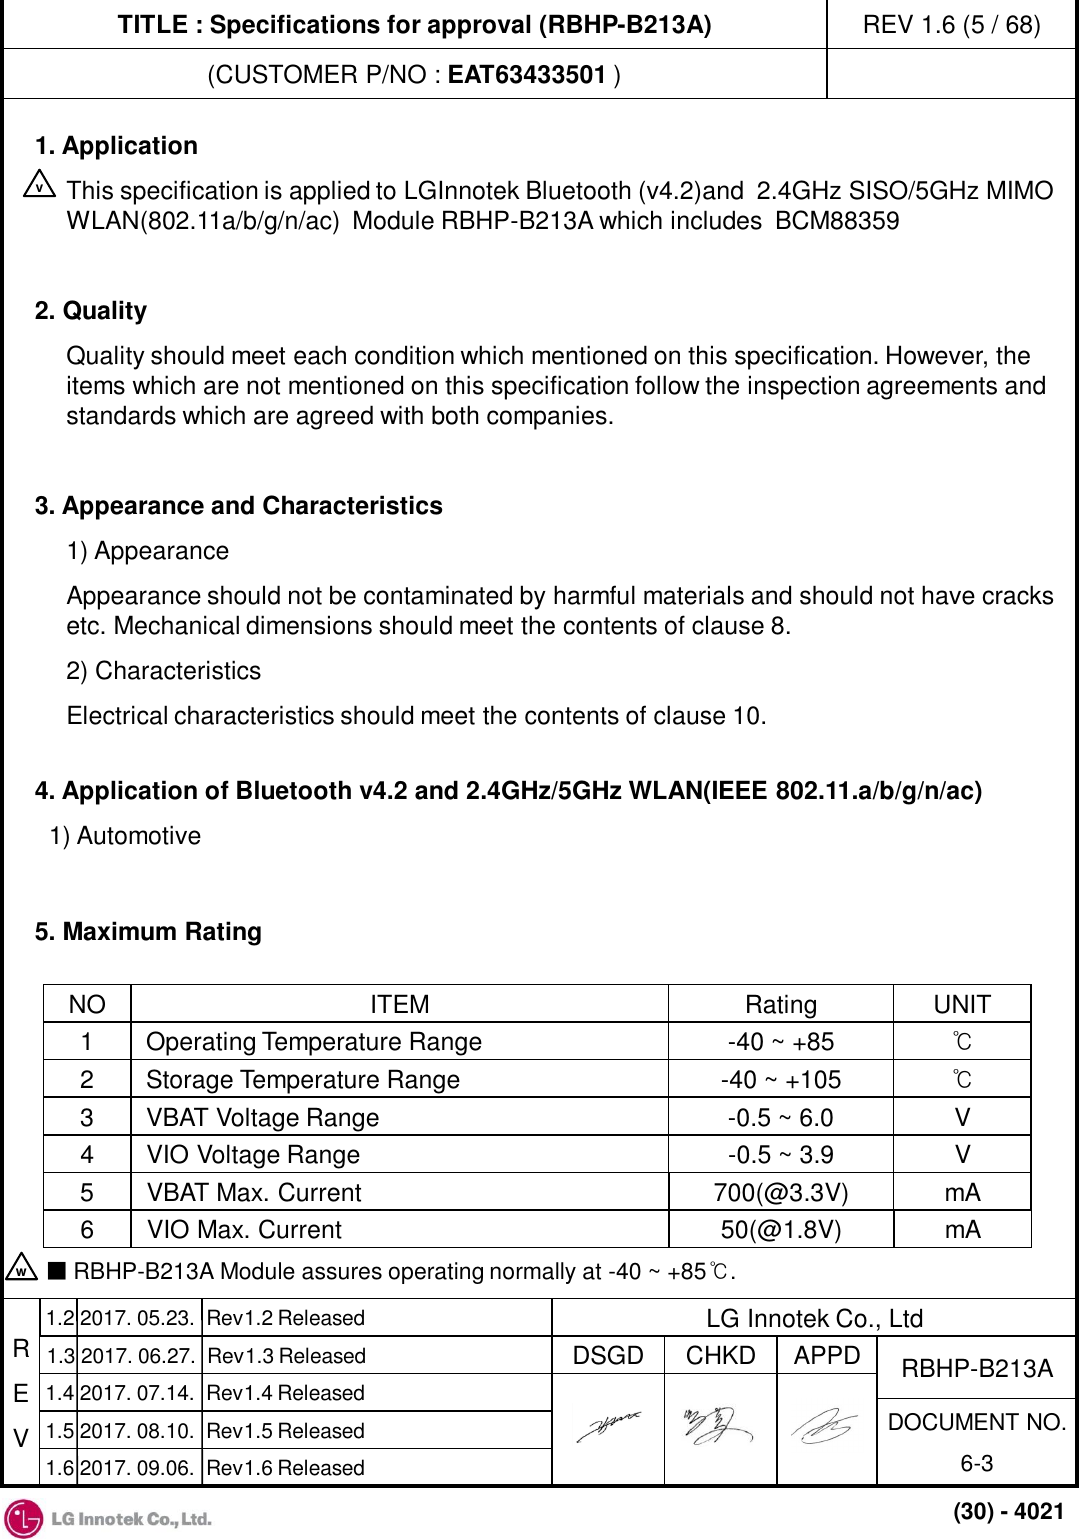 TITLE : Specifications for approval (RBHP-B213A) (CUSTOMER P/NO : EAT63433501 ) REV 1.6 (5 / 68) R E V APPD CHKD DSGD DOCUMENT NO. 6-3 RBHP-B213A LG Innotek Co., Ltd 1.4 2017. 07.14.  Rev1.4 Released 1.5 2017. 08.10.  Rev1.5 Released (30) - 4021 1.2 2017. 05.23.  Rev1.2 Released 1.3 2017. 06.27.  Rev1.3 Released 1.6 2017. 09.06.  Rev1.6 Released 1. Application This specification is applied to LGInnotek Bluetooth (v4.2)and  2.4GHz SISO/5GHz MIMO  WLAN(802.11a/b/g/n/ac)  Module RBHP-B213A which includes  BCM88359   2. Quality Quality should meet each condition which mentioned on this specification. However, the items which are not mentioned on this specification follow the inspection agreements and standards which are agreed with both companies.  3. Appearance and Characteristics 1) Appearance Appearance should not be contaminated by harmful materials and should not have cracks etc. Mechanical dimensions should meet the contents of clause 8. 2) Characteristics Electrical characteristics should meet the contents of clause 10.  4. Application of Bluetooth v4.2 and 2.4GHz/5GHz WLAN(IEEE 802.11.a/b/g/n/ac)     1) Automotive  5. Maximum Rating NO  ITEM  Rating  UNIT 1  Operating Temperature Range  -40 ~ +85  ℃ 2  Storage Temperature Range  -40 ~ +105  ℃ 3  VBAT Voltage Range  -0.5 ~ 6.0  V 4  VIO Voltage Range  -0.5 ~ 3.9  V 5  VBAT Max. Current    700(@3.3V)  mA 6  VIO Max. Current    50(@1.8V)  mA v ■ RBHP-B213A Module assures operating normally at -40 ~ +85℃. w 